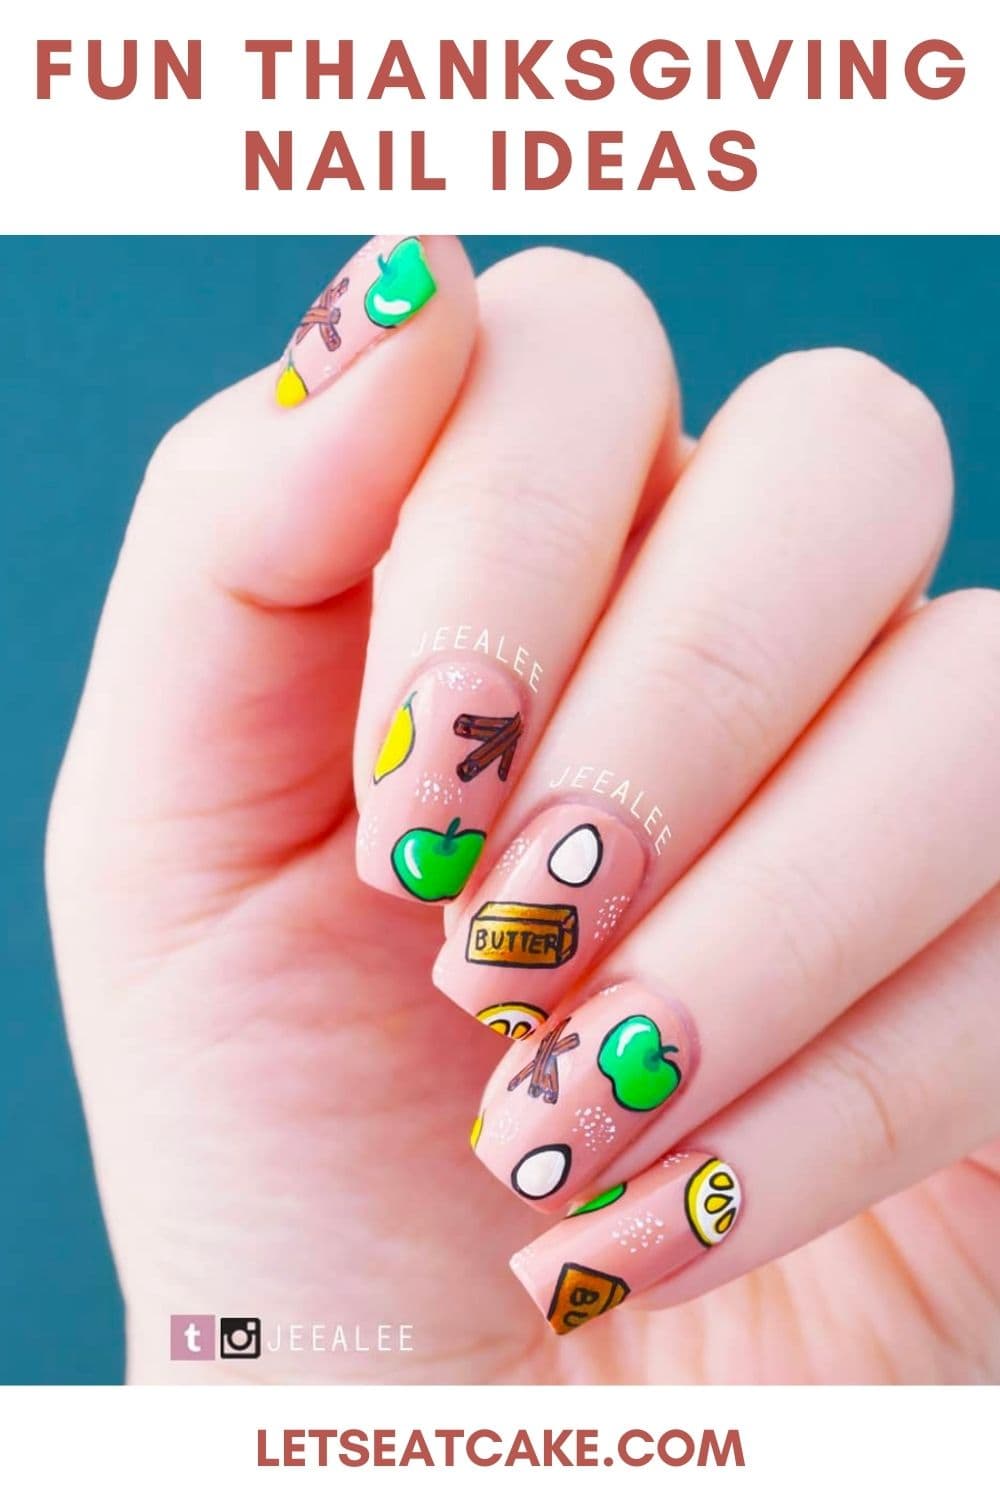 18 Thanksgiving Nail Design Ideas for Your Holiday Manicure Let's Eat